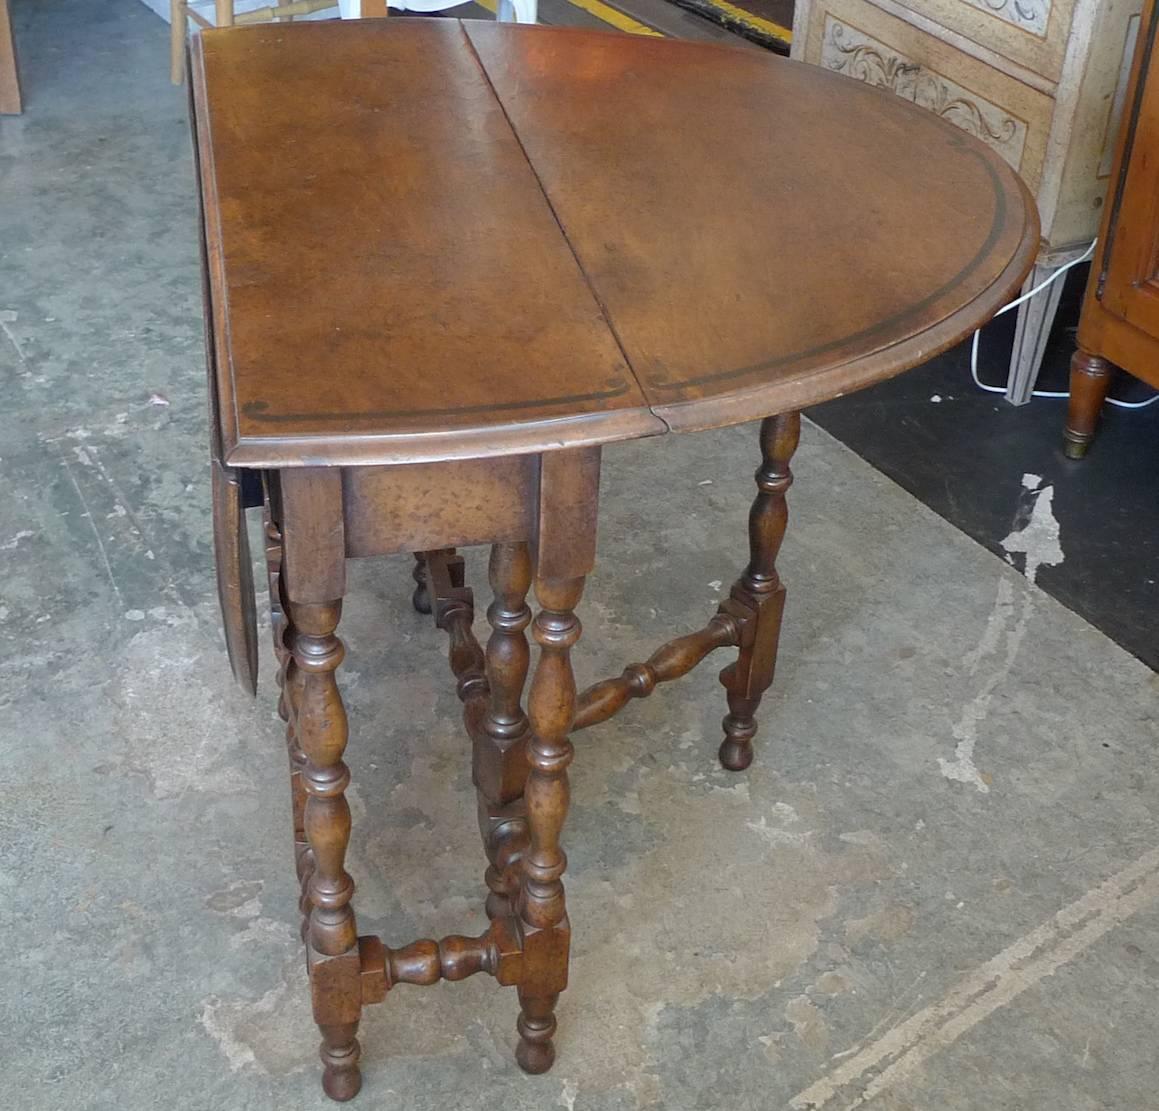 Painted English 19th Century Walnut Gate-Leg, Drop-Leaf Oval Table with Turned Legs